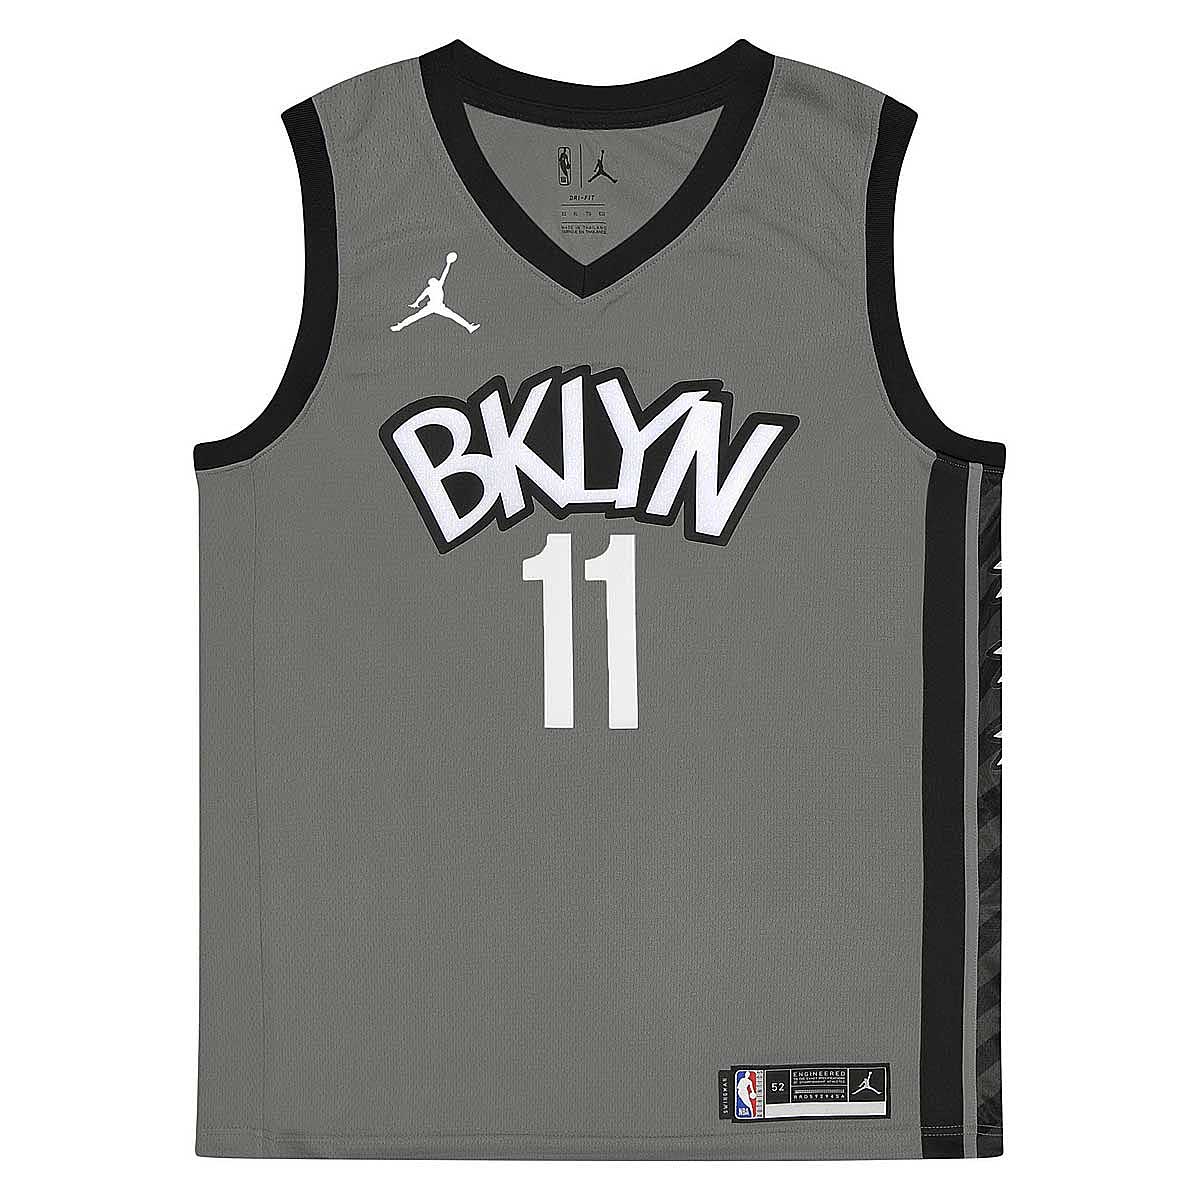 Buy NBA BROOKLYN NETS COURTSIDE TRACKSUIT for N/A 0.0 | Kickz-DE-AT-INT